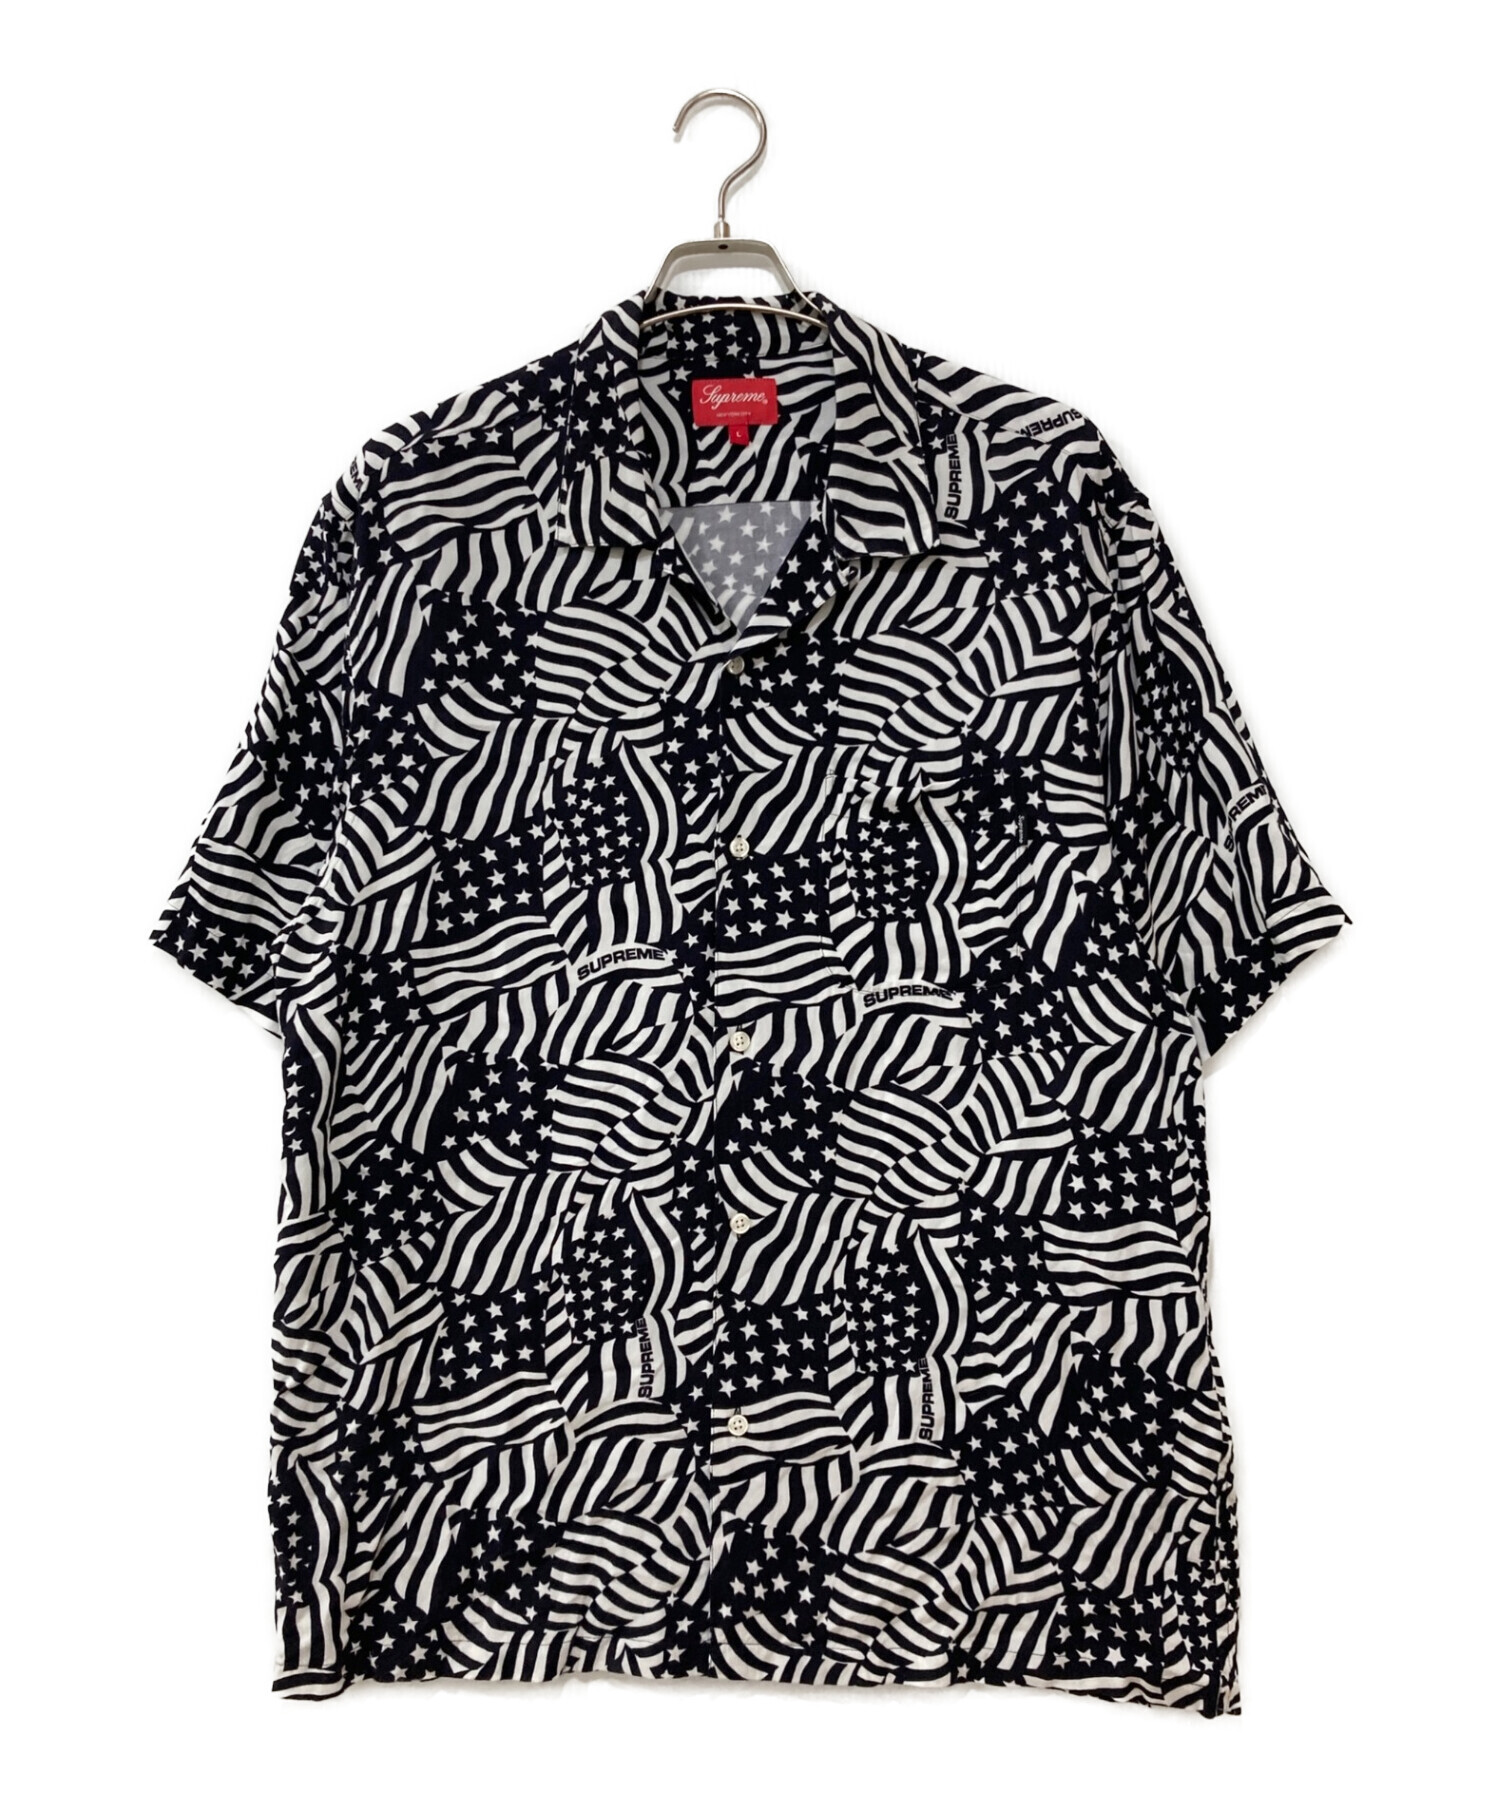 20SS L サイズ Supreme Flags Rayon S/S Shirt | www.darquer.fr